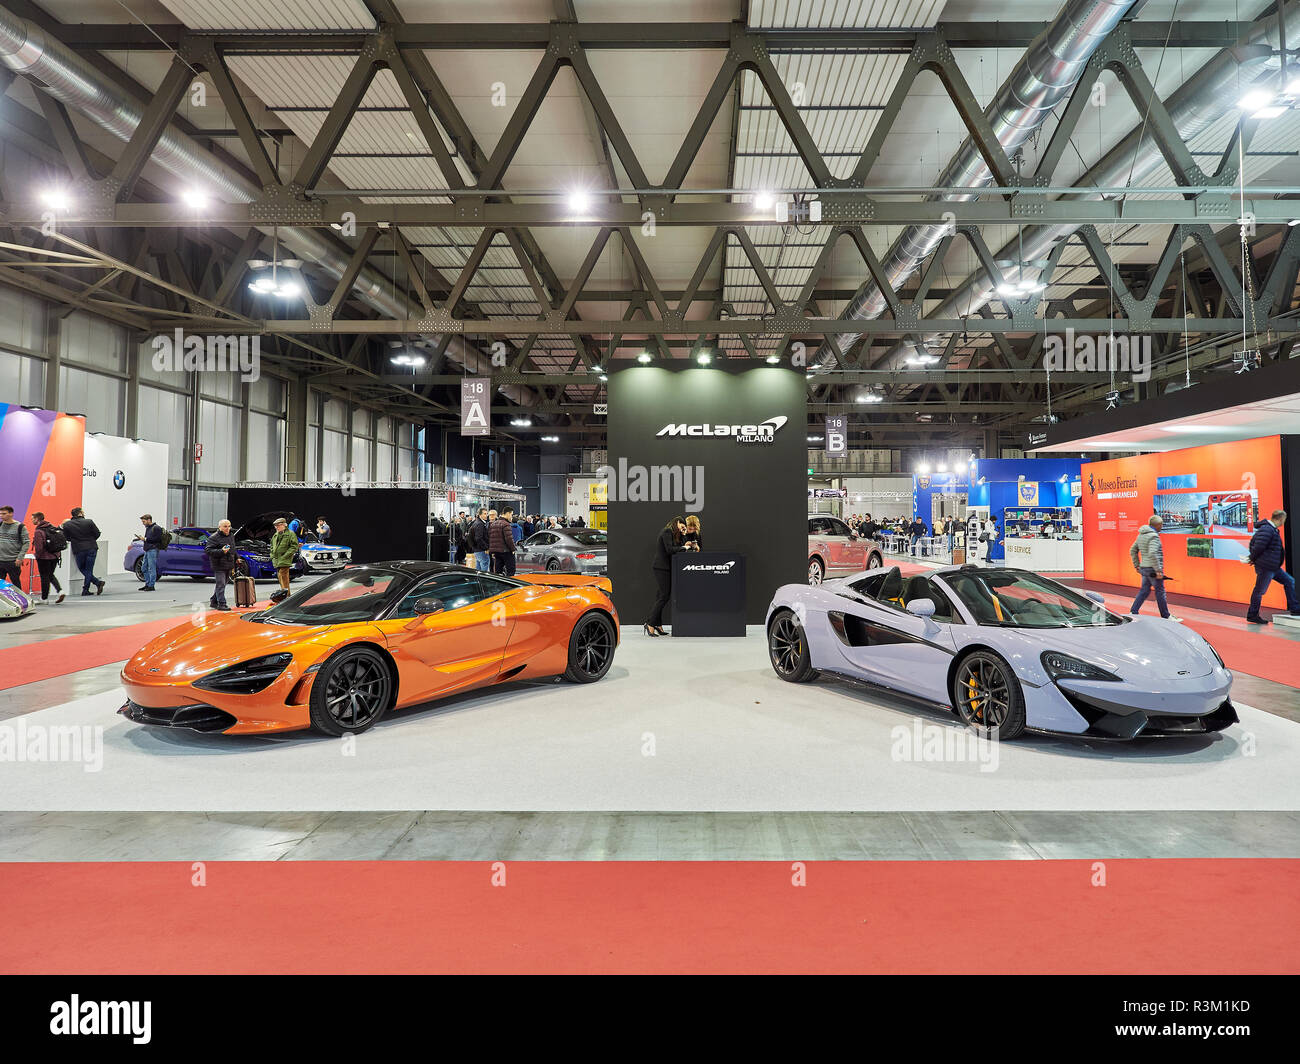 Milan, Lombardy Italy - November 23 , 2018 - McLaren stand in  Autoclassica Milano 2018 edition at Fiera Milano Rho Credit: Armando Borges/Alamy Live News Stock Photo